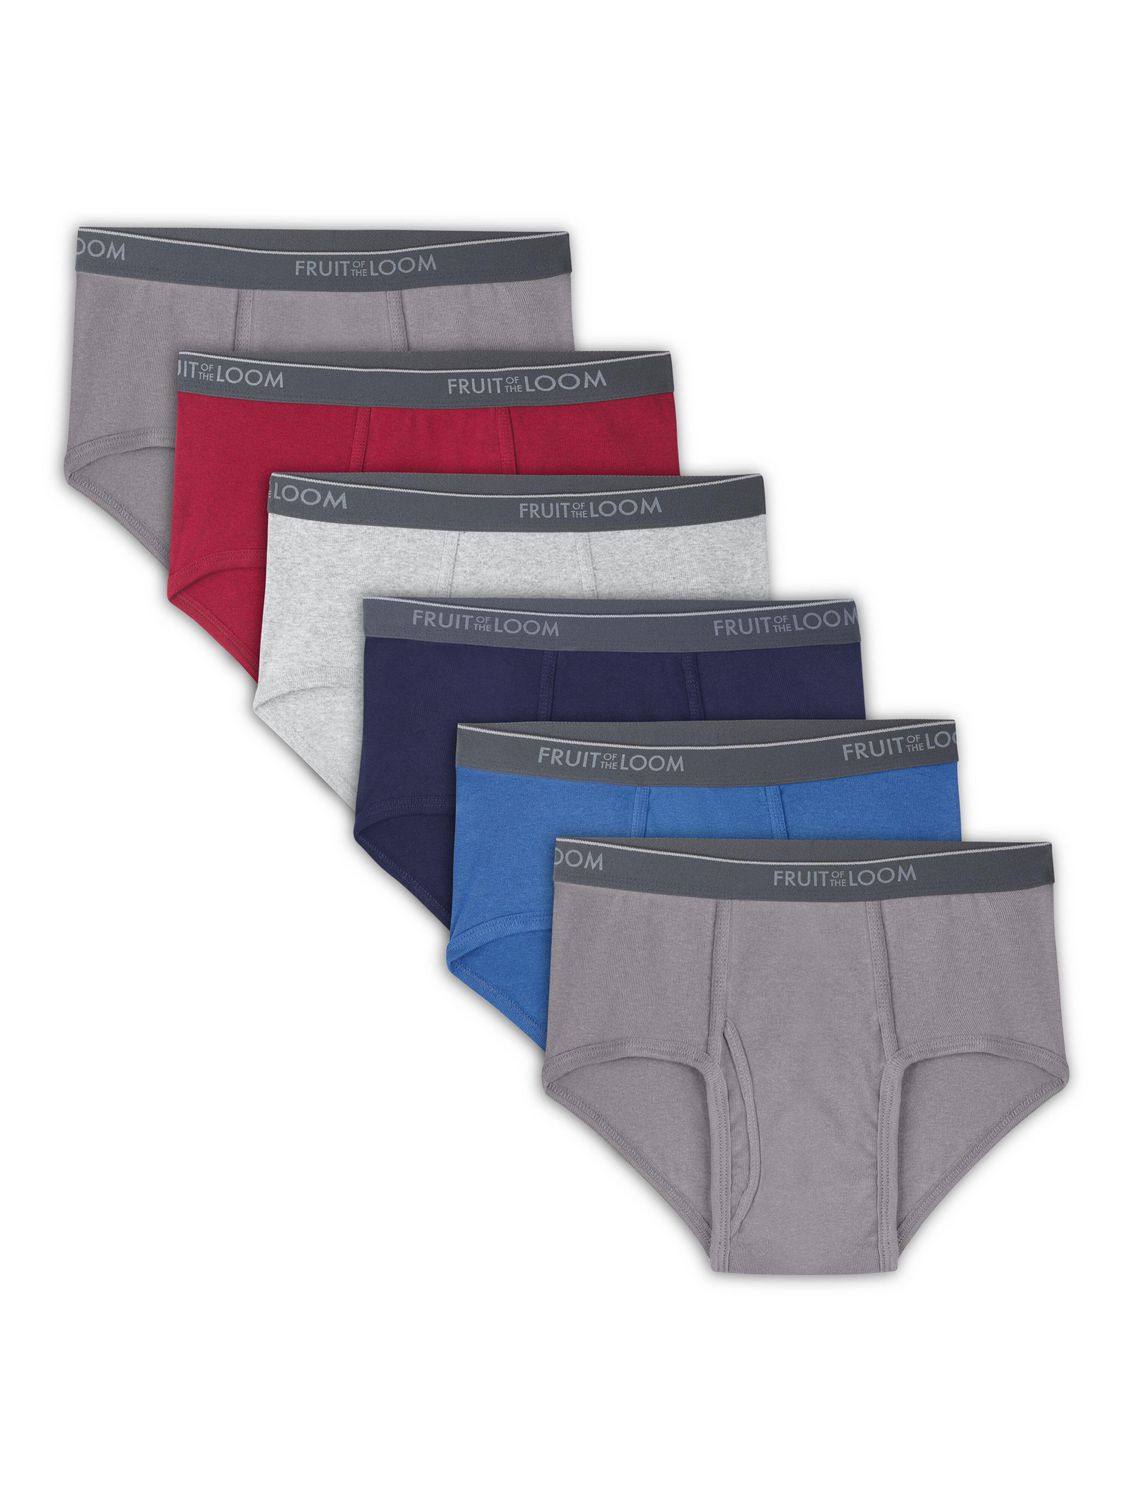 Fruit of the Loom Men's Briefs Mid-Rise Underwear 12-Pack Colors